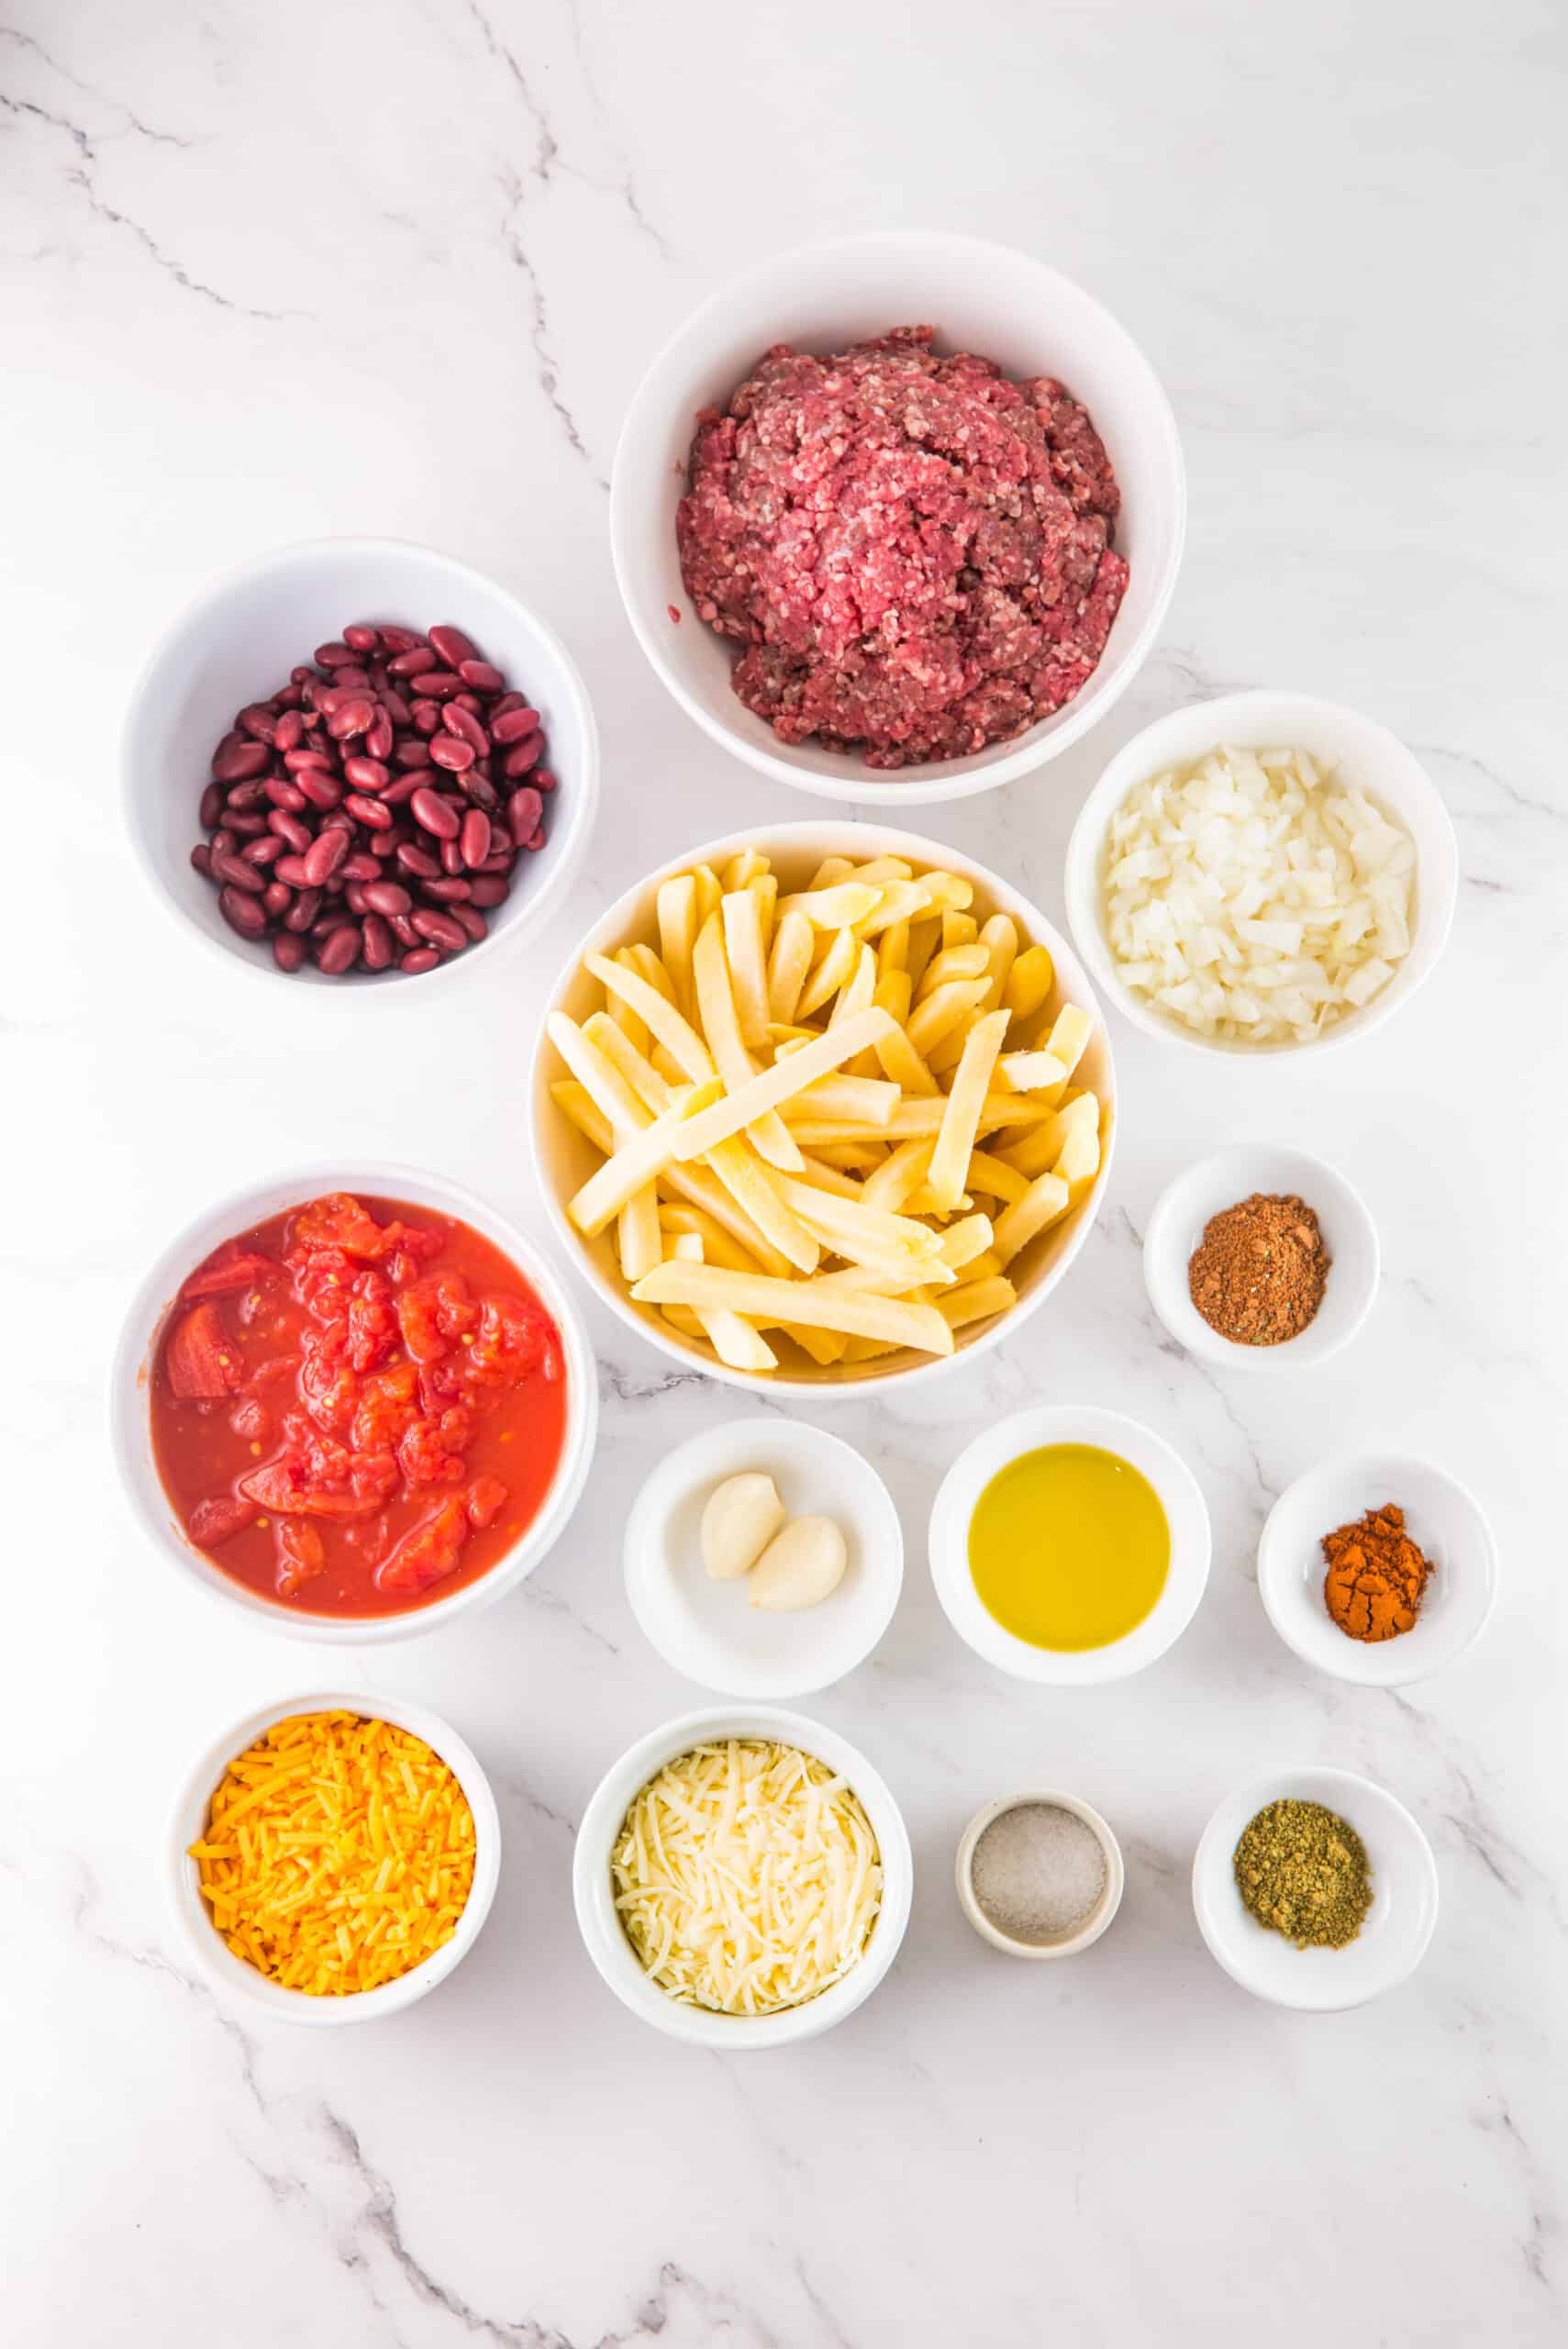 Key ingredients to Chili Cheese fries 
